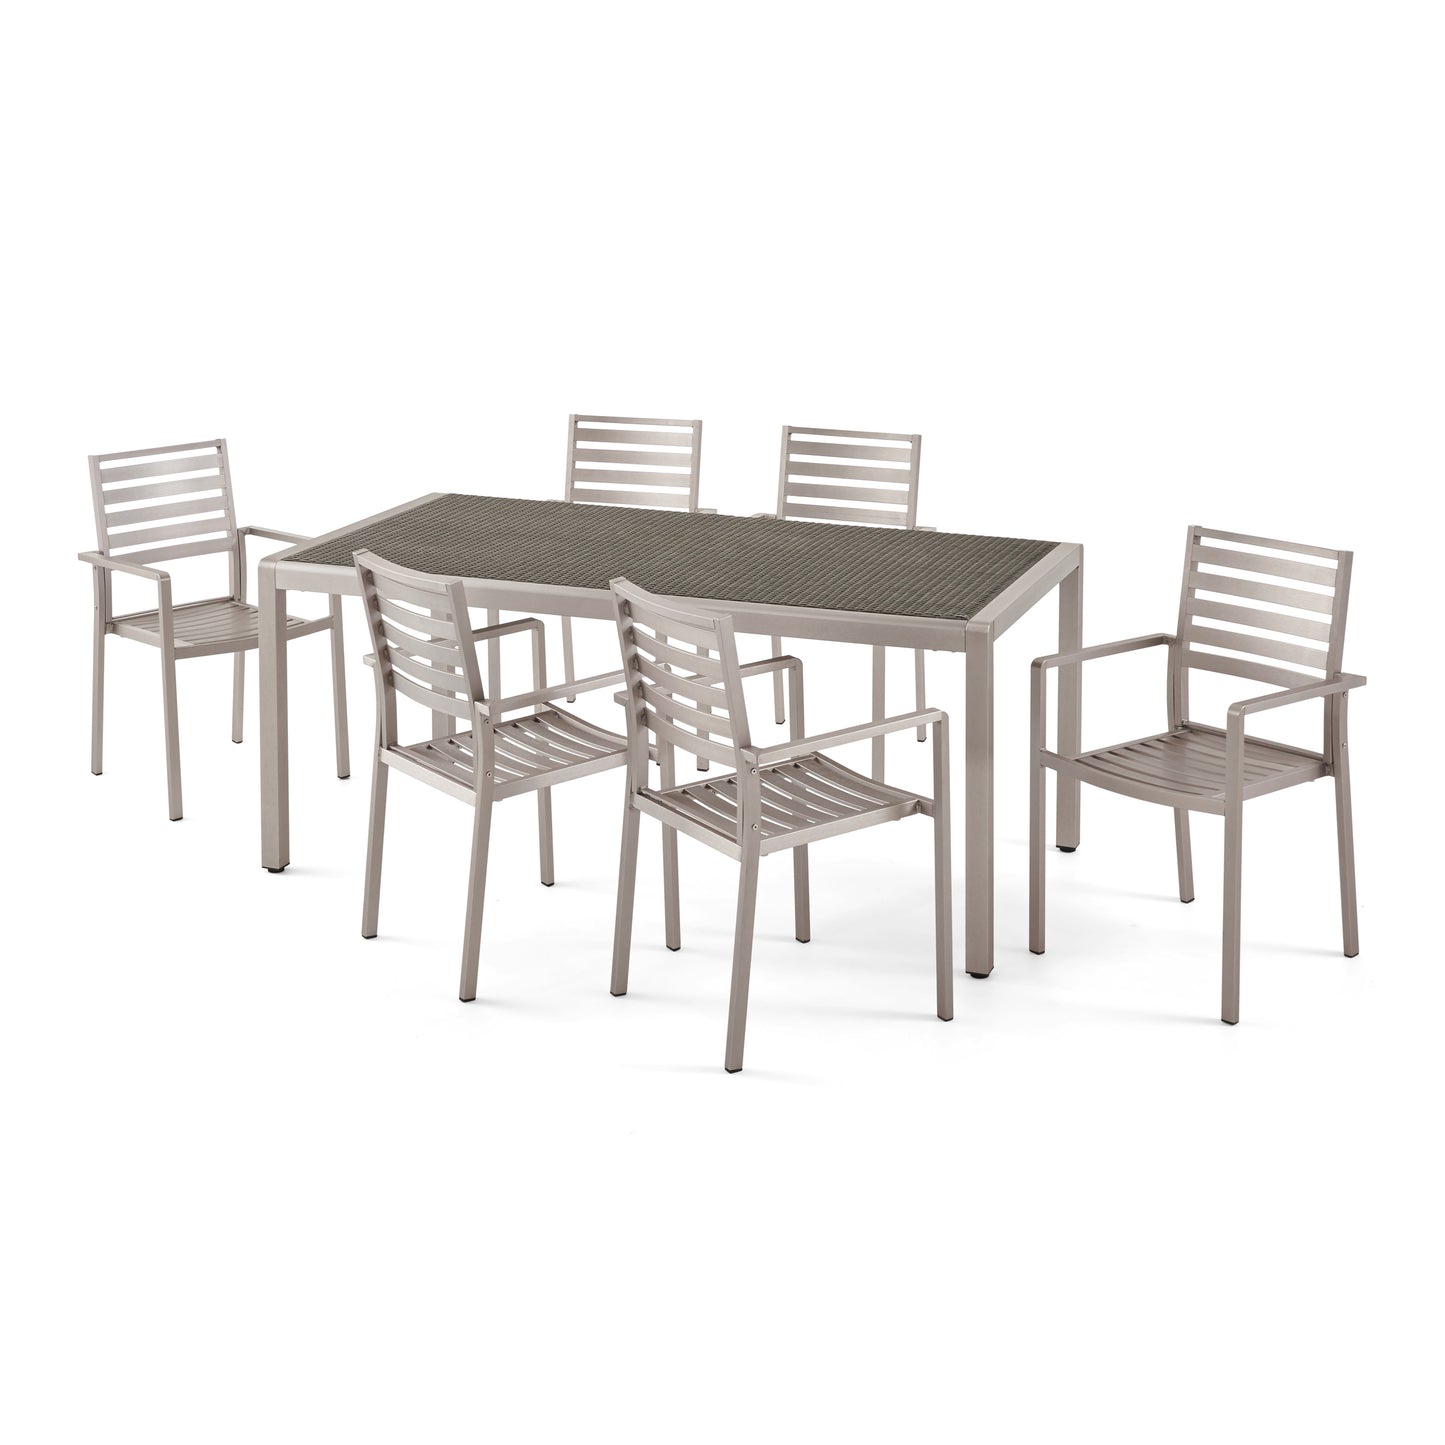 Cherie Outdoor Modern 6 Seater Aluminum Dining Set with Wicker Table Top